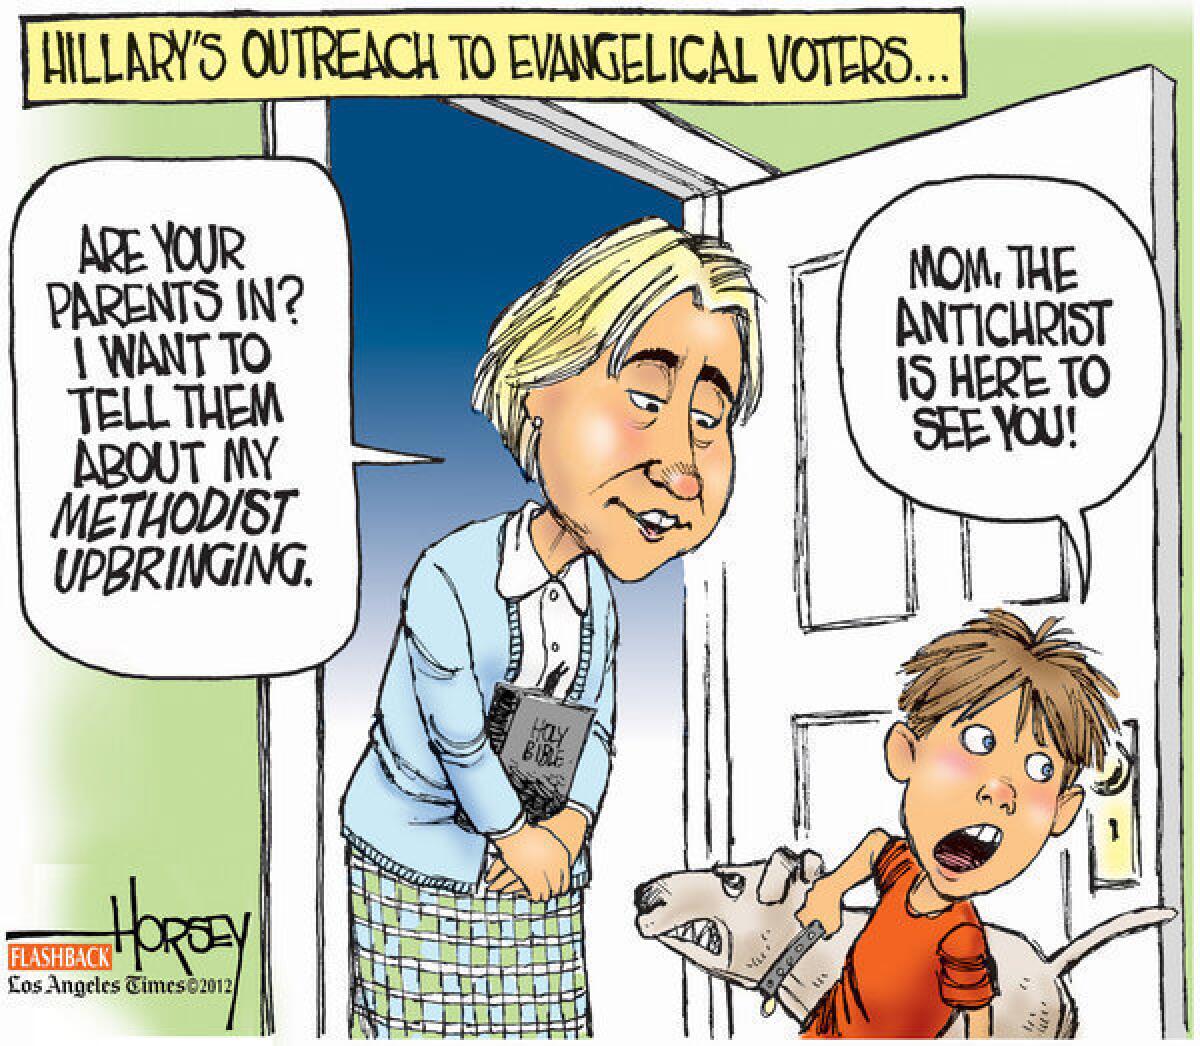 In 2008, Hillary Clinton made an appeal to evangelical Christian voters, but, as this Horsey cartoon from that campaign shows, Clinton's effort found little success.